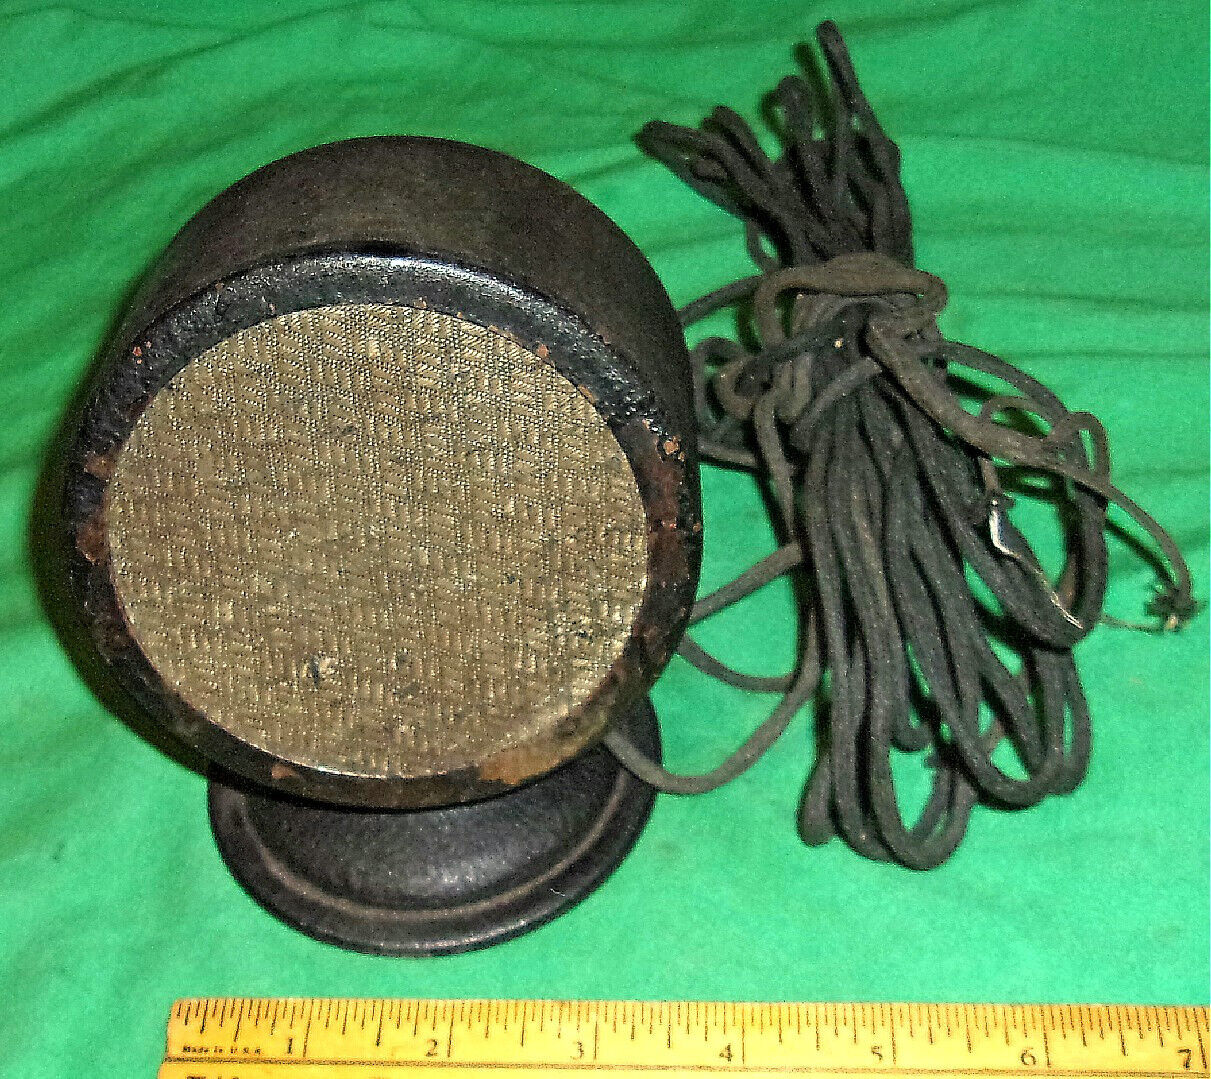 Vintage Philco Microphone for Home Recording Models 41-608 others 1.3K (1940s)